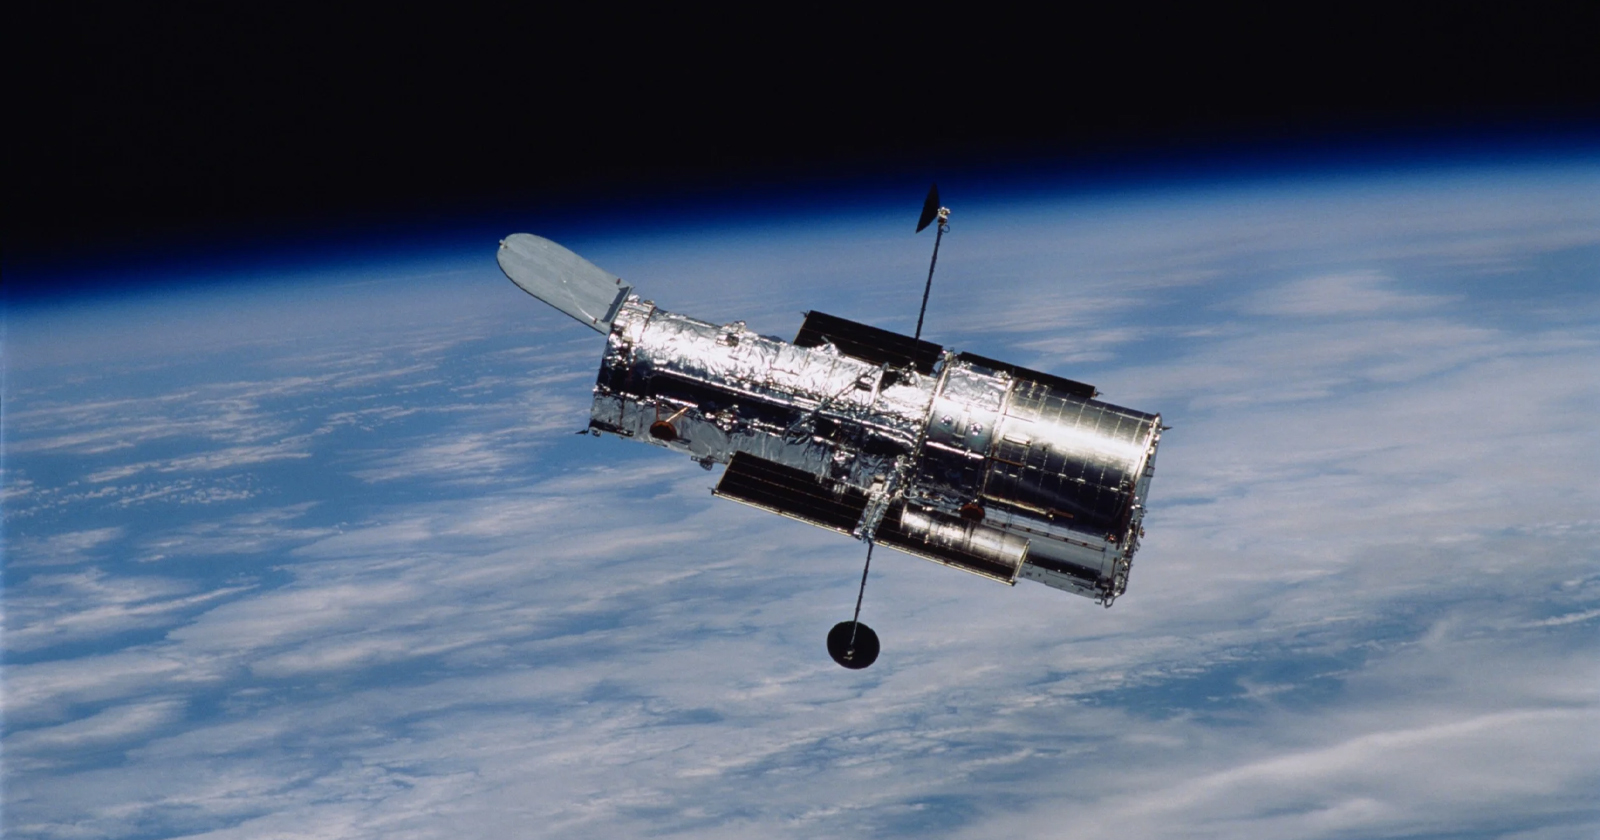 The Hubble Space Telescope as seen from space with Earth in the background